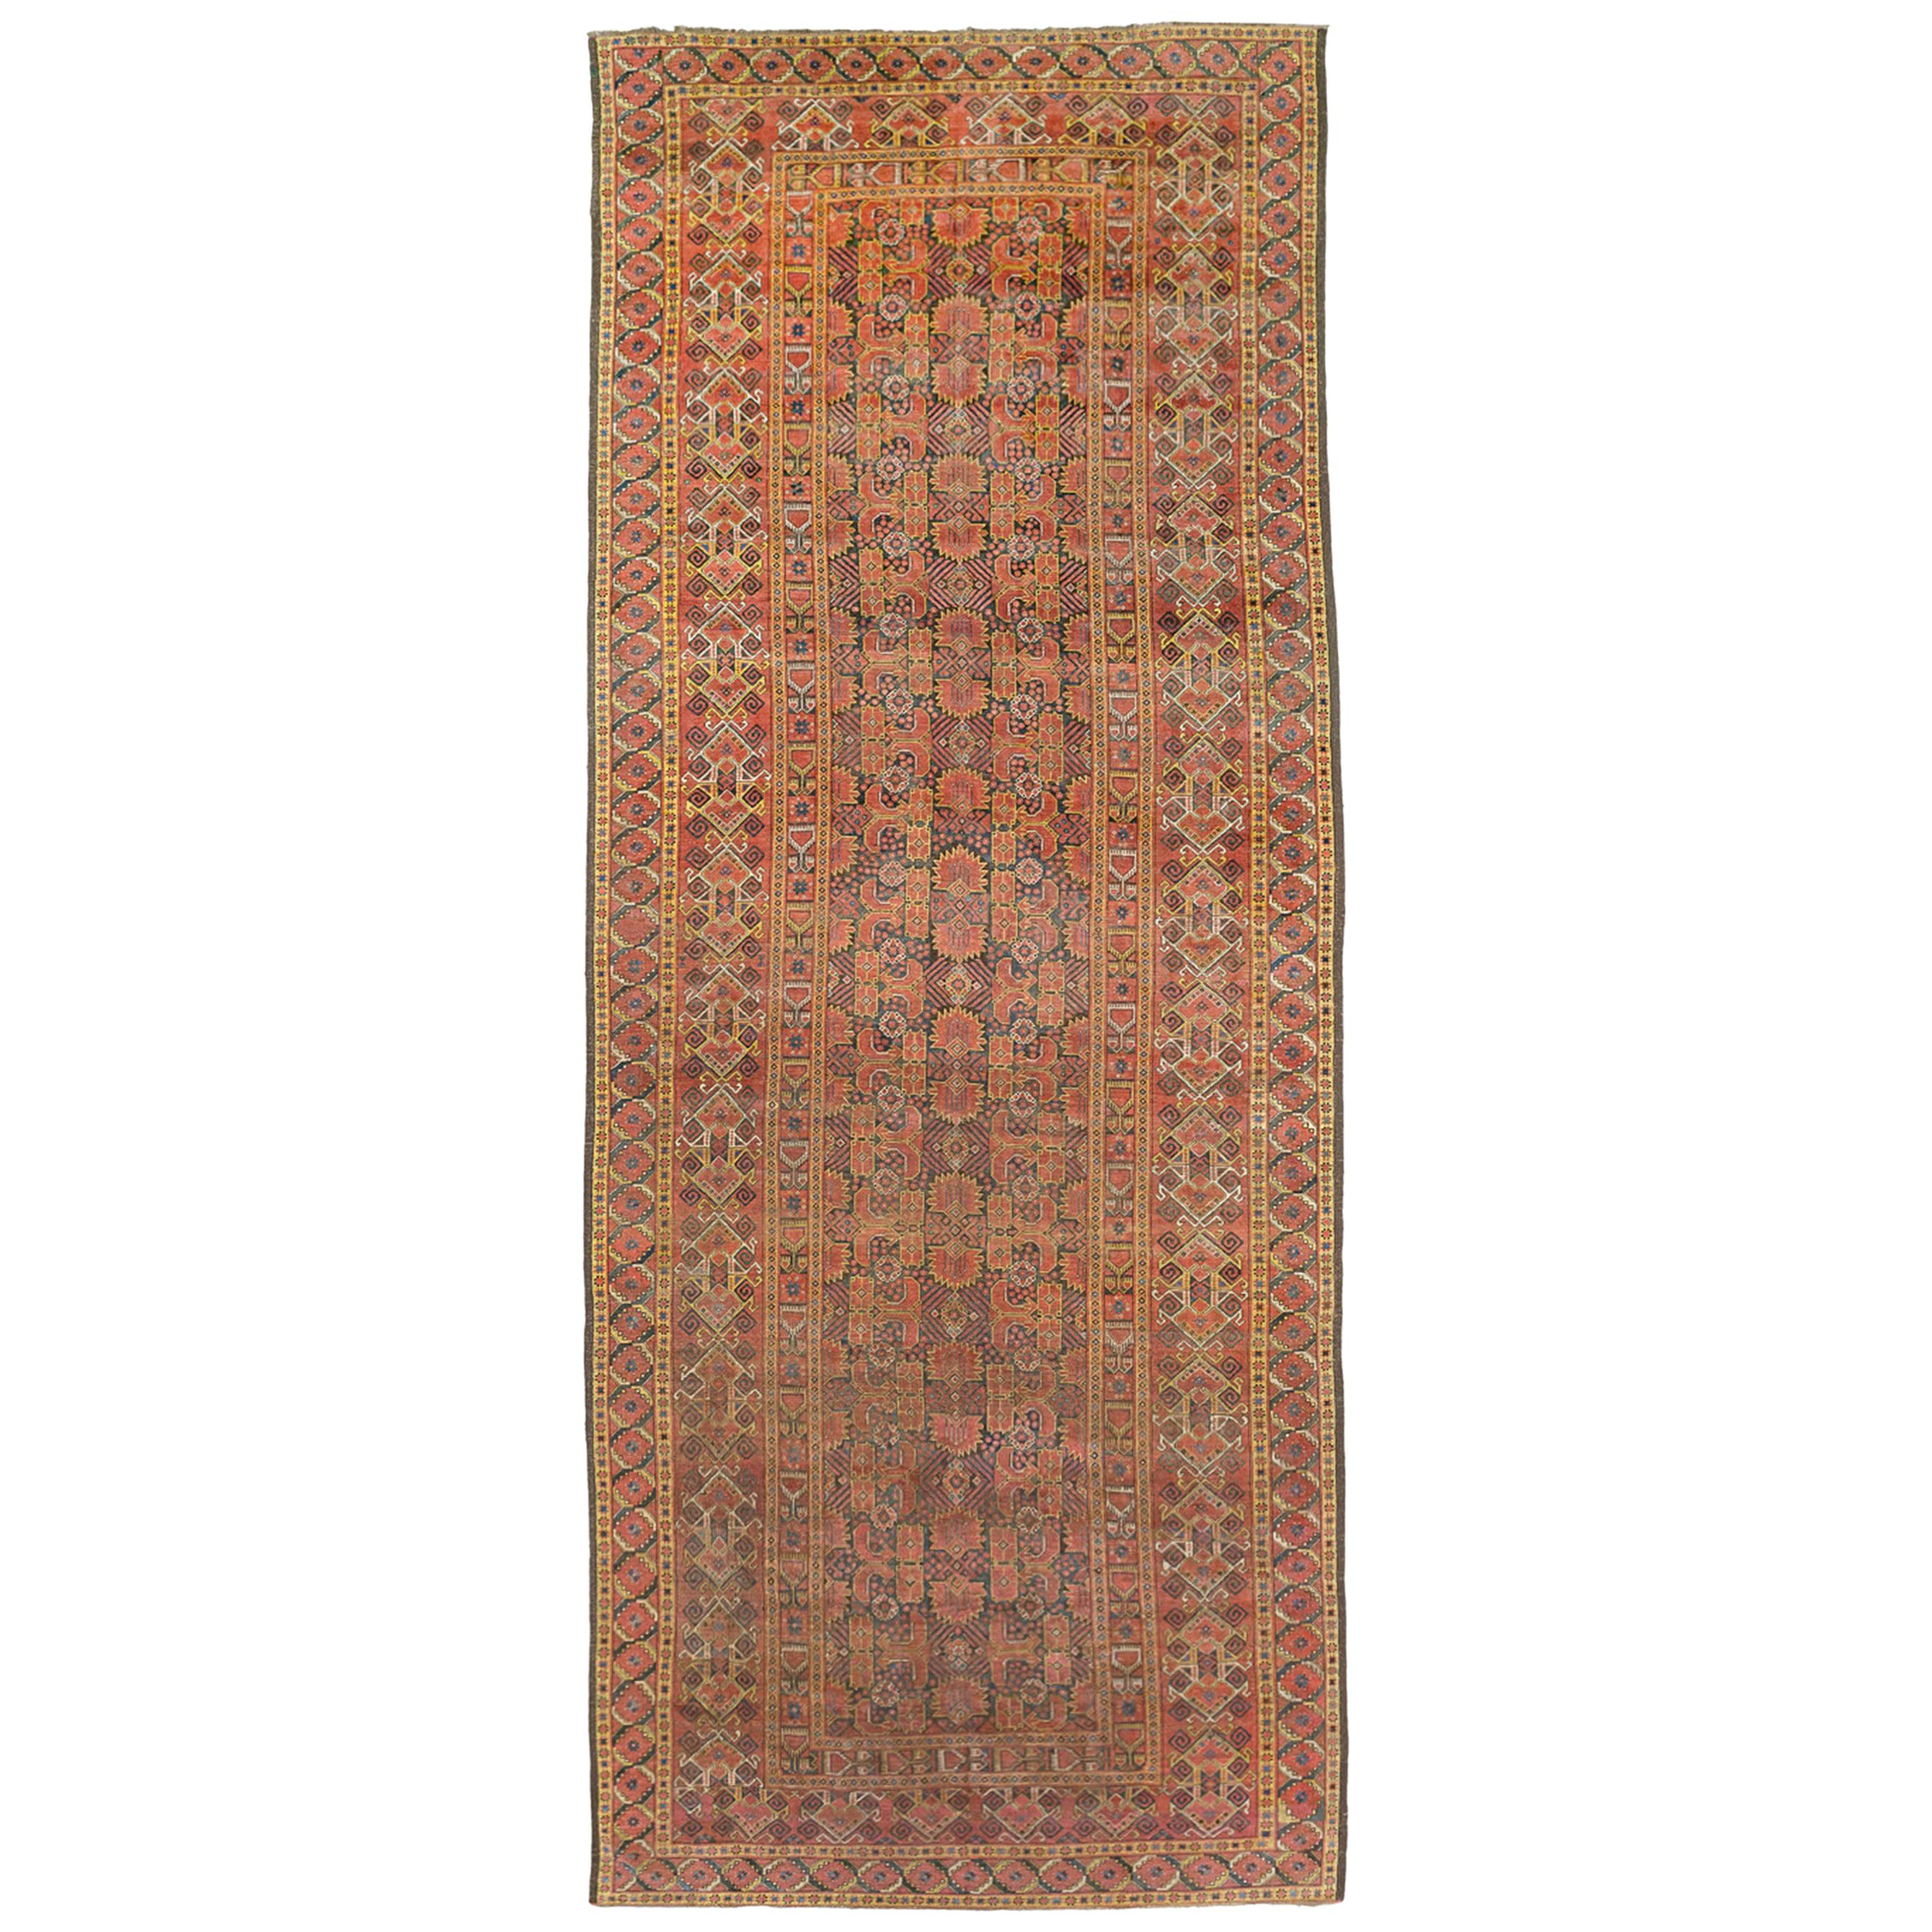 Antique Afghan Bashir Style Rug with Black and Yellow Floral & Geometric Details For Sale